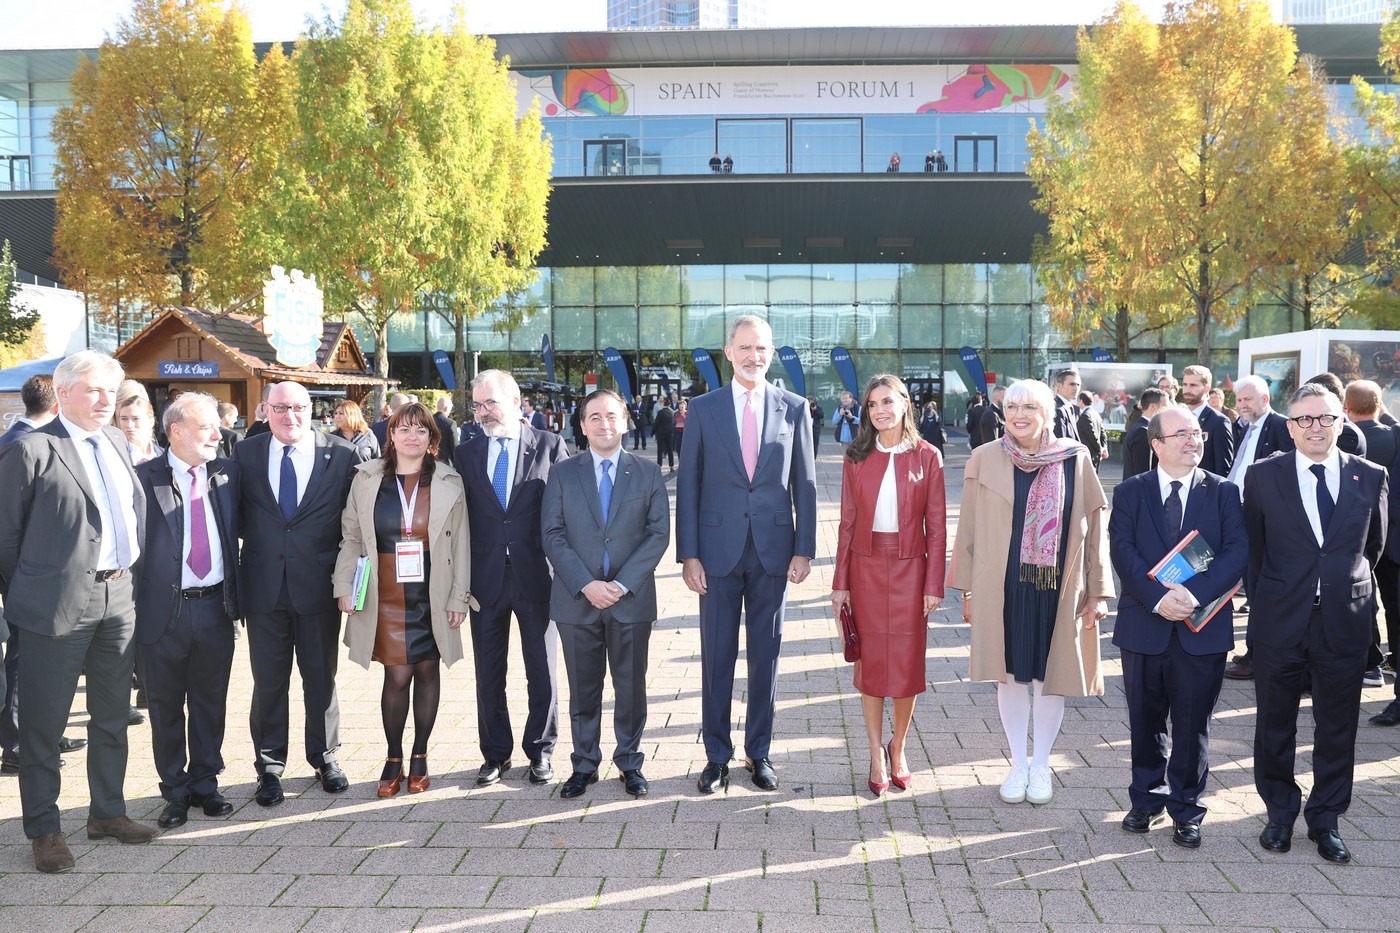 King Felipe and Queen Letizia of Spain began the last day of the German state visit with a visit to the Frankfurt Book Fair at the Messe Frankfurt Congress Center. After the visit to Book Fair the couple visited Cervantes Institute before heading home